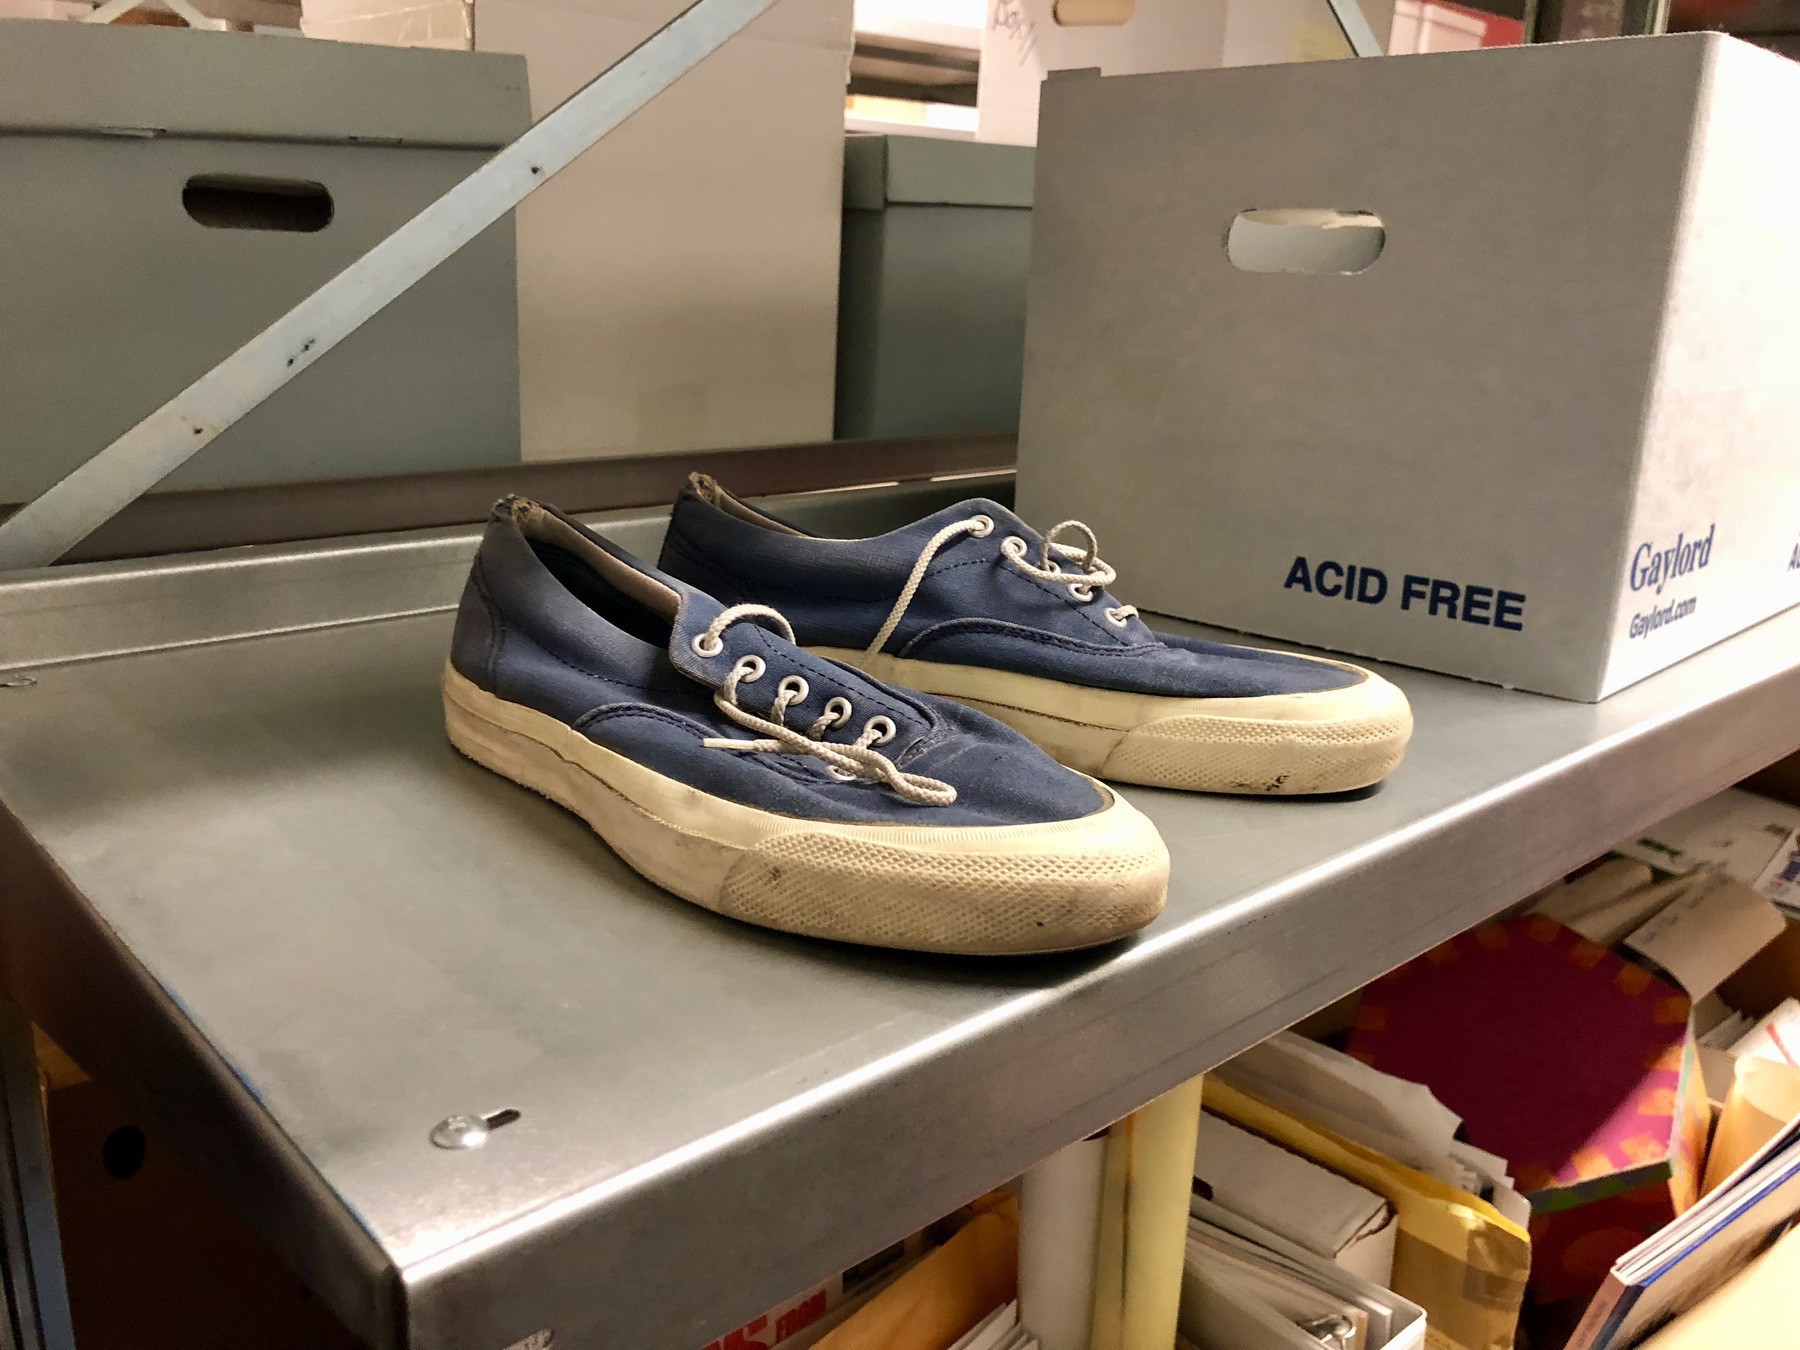 Fred Rogers (Mr. Rogers) Shoes at the Fred Rogers Center Archive